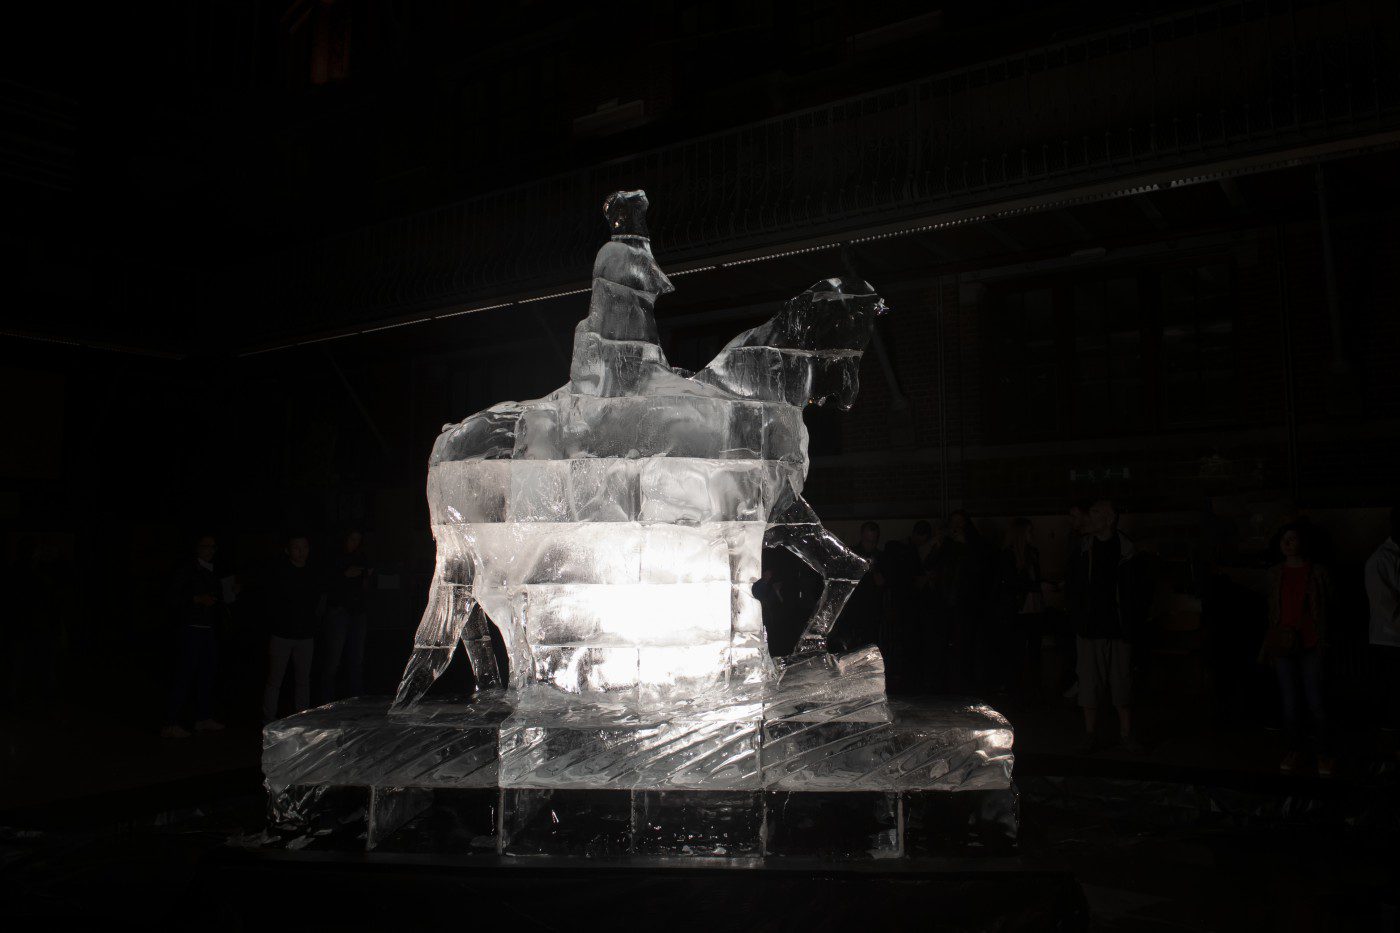 Laura Nsengiyumva, Peopl, 2018. Installation view at Nuit Blanche BXL 2018. The immense ice sculpture was meant to melt throughout this event to reflect on the slowly but gradually mental decolonisation process.
